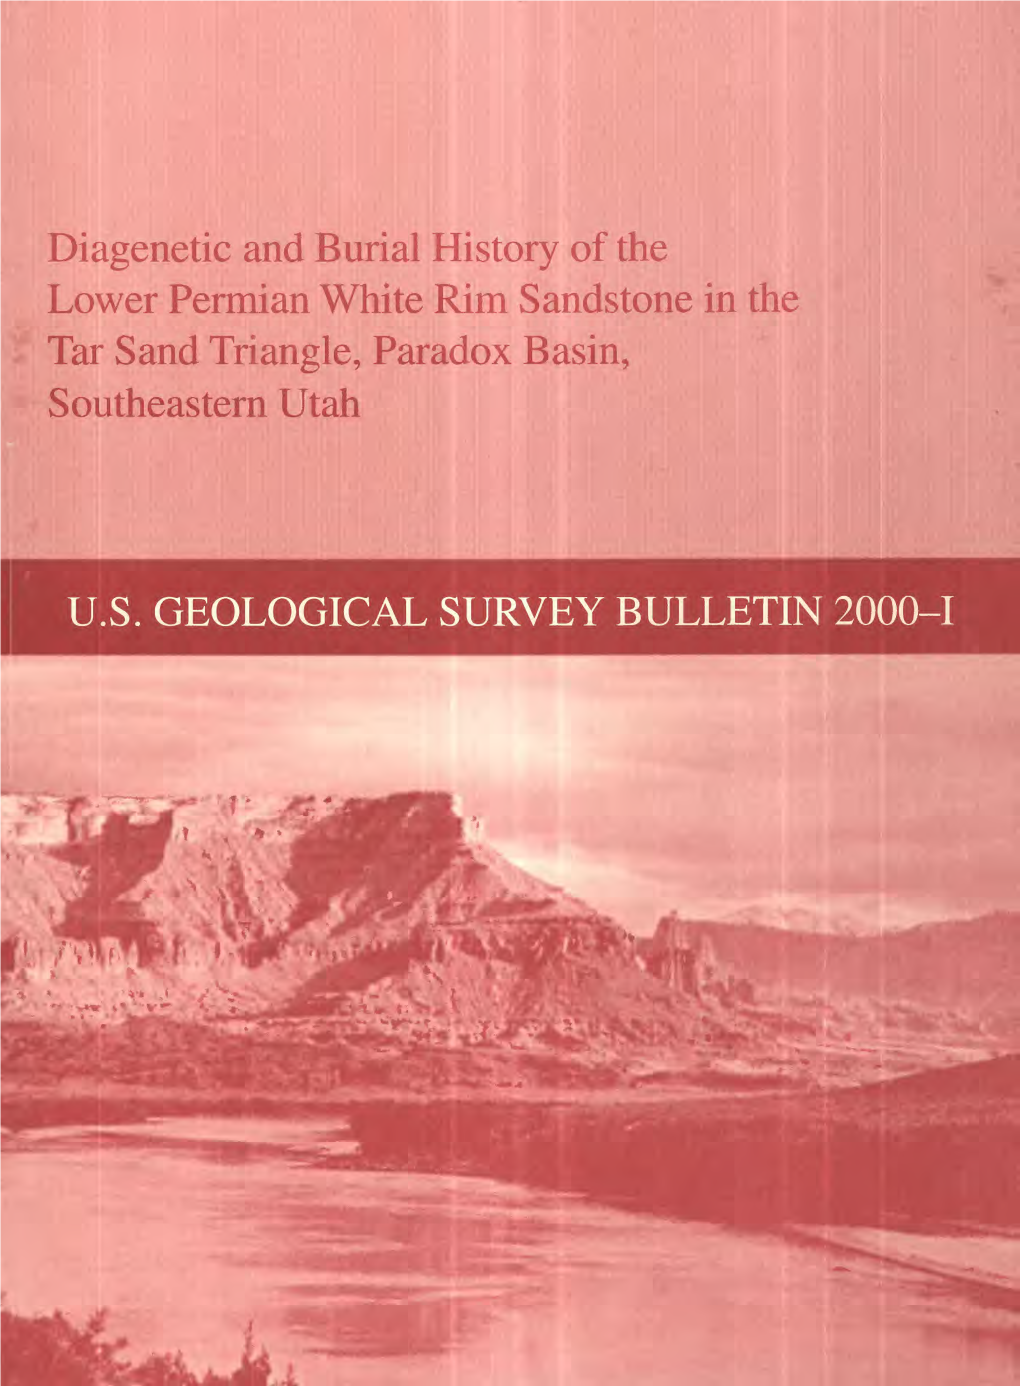 Diagenetic and Burial History of the Lower Permian White Rim Sandstone in the Tar Sand Triangle, Paradox Basin, Southeastern Utah